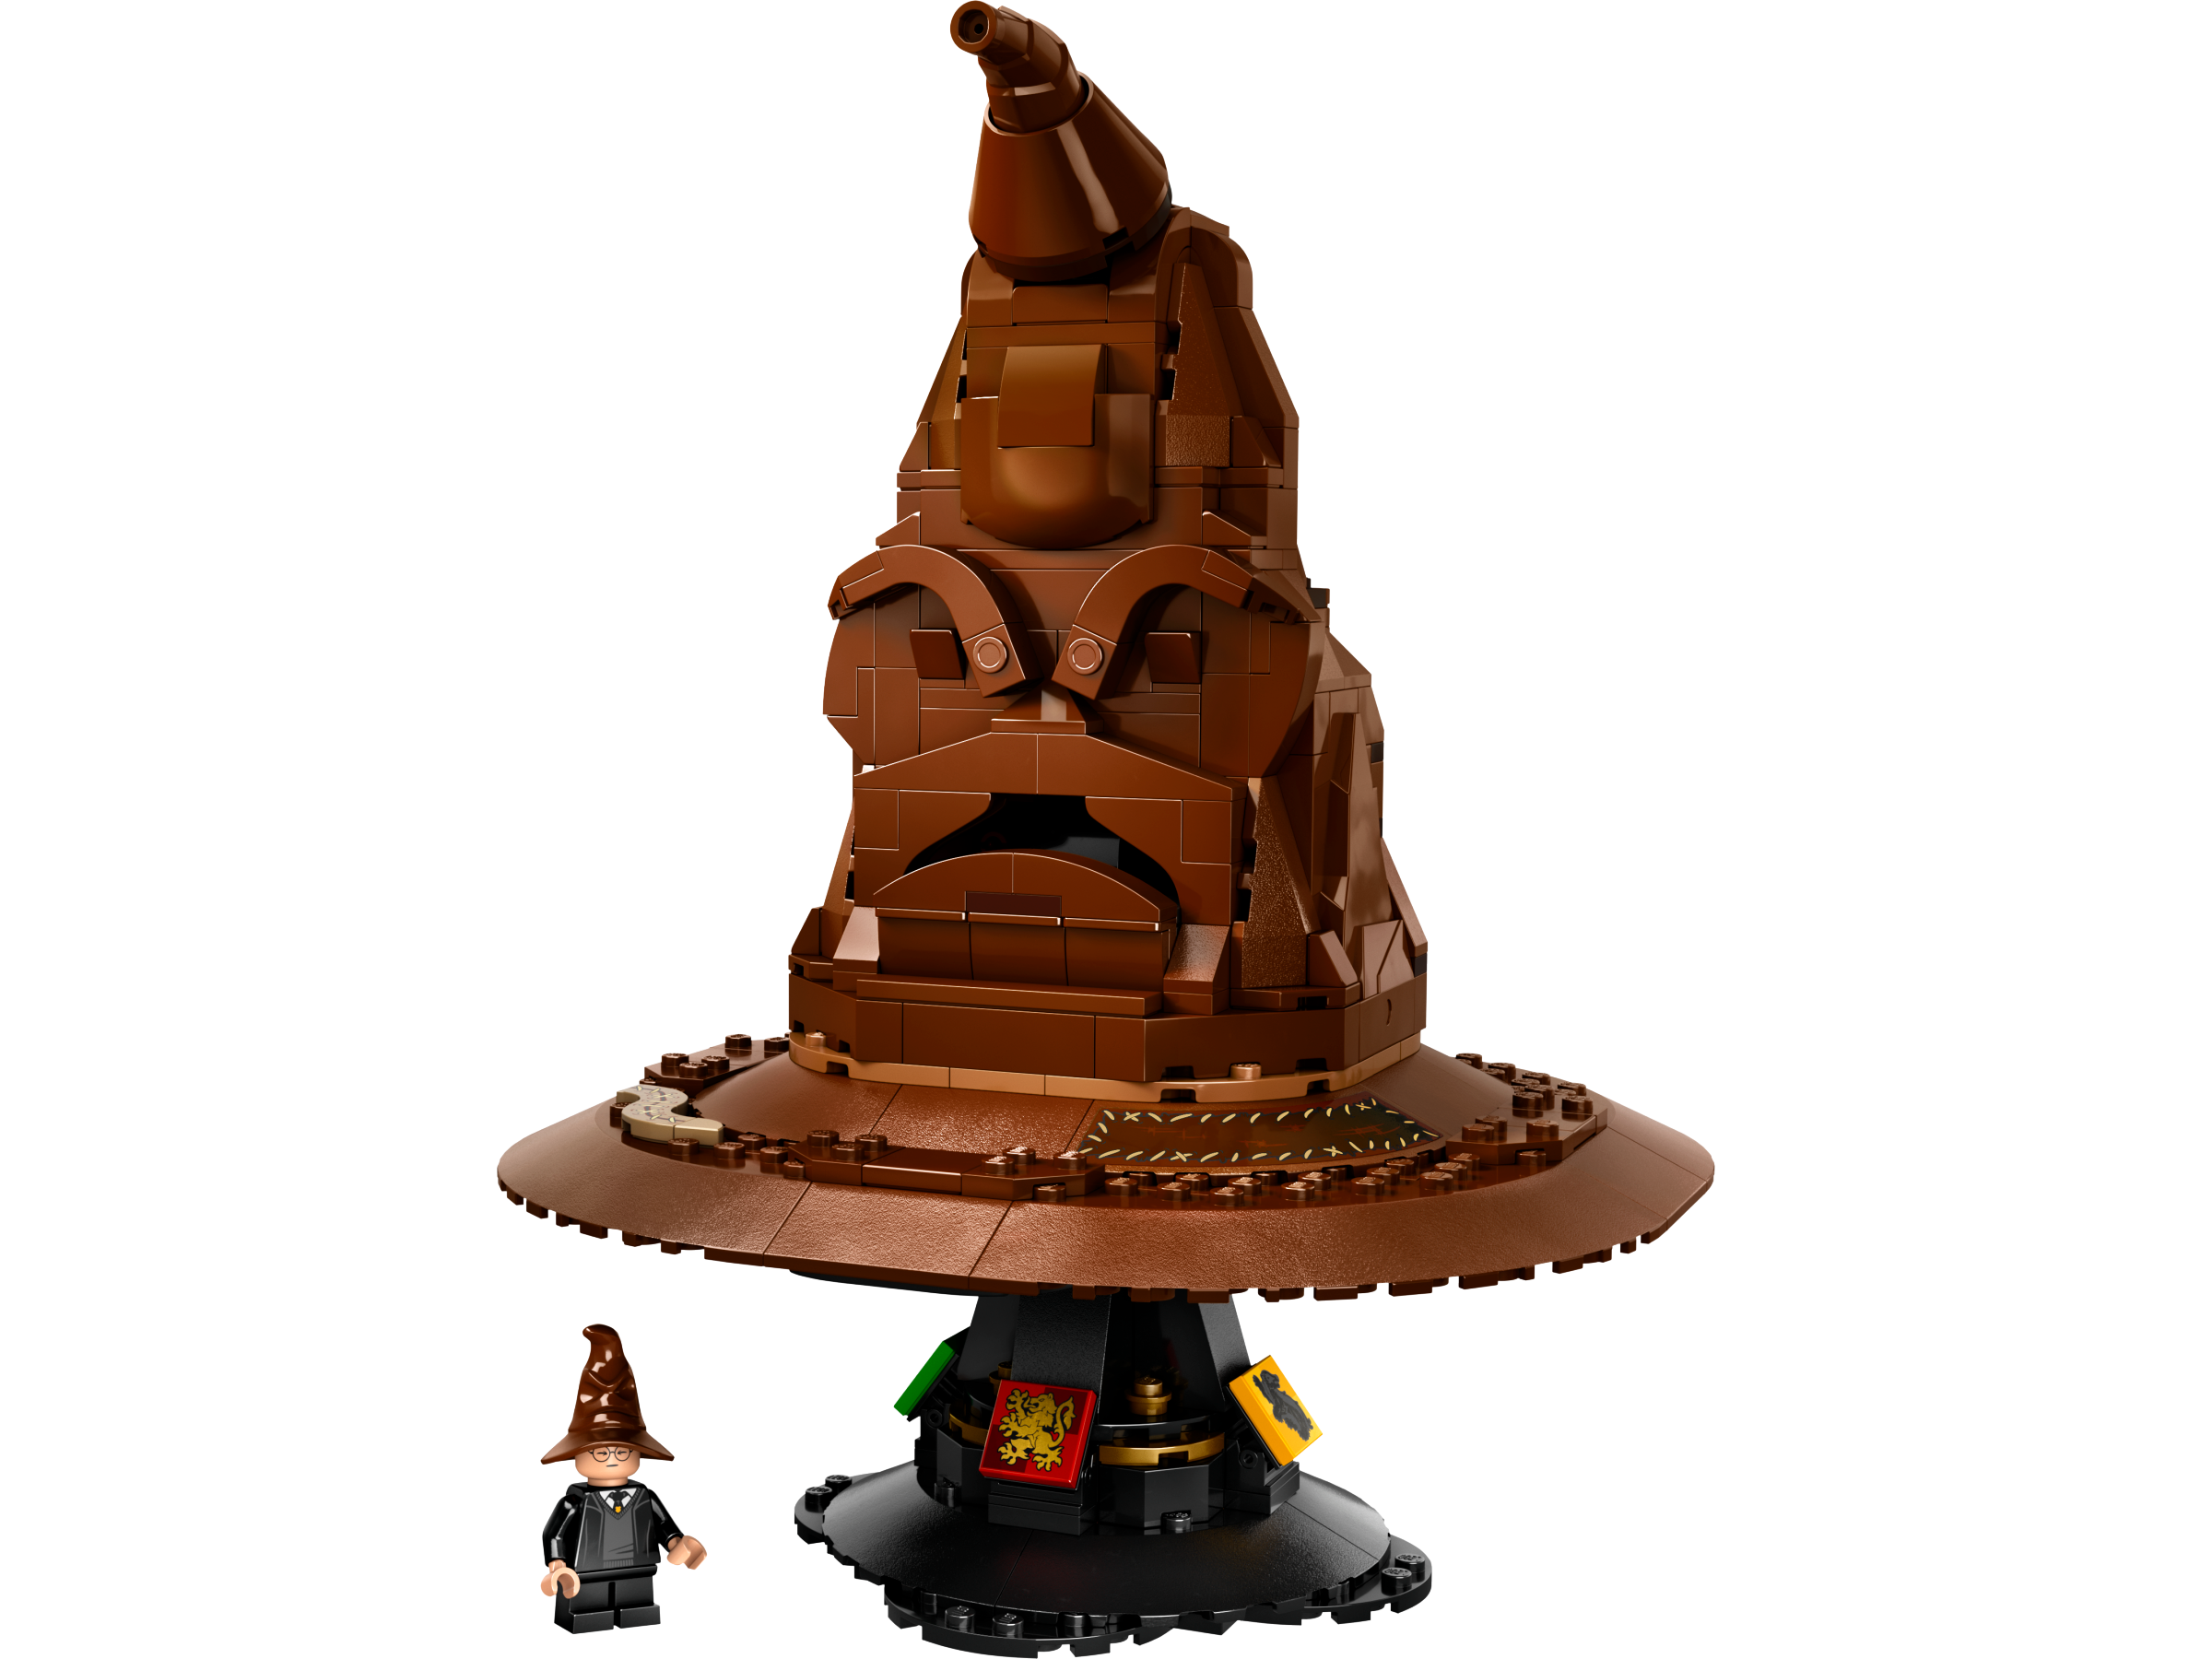 Harry Potter: 76429 Talking Sorting Hat (sent in by Brick Tap user